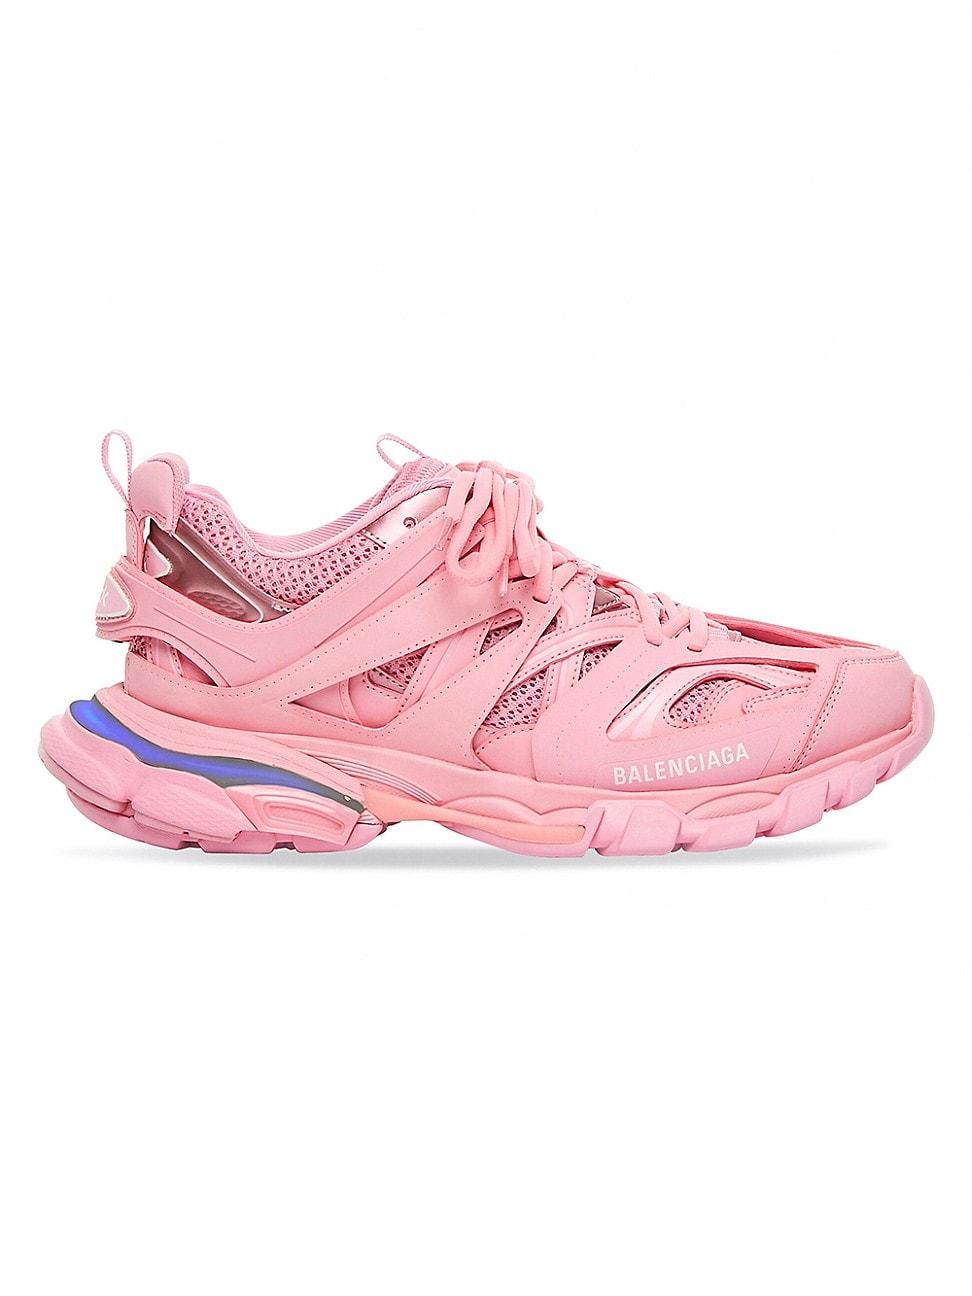 Balenciaga Track Led Sneaker in Pink | Lyst